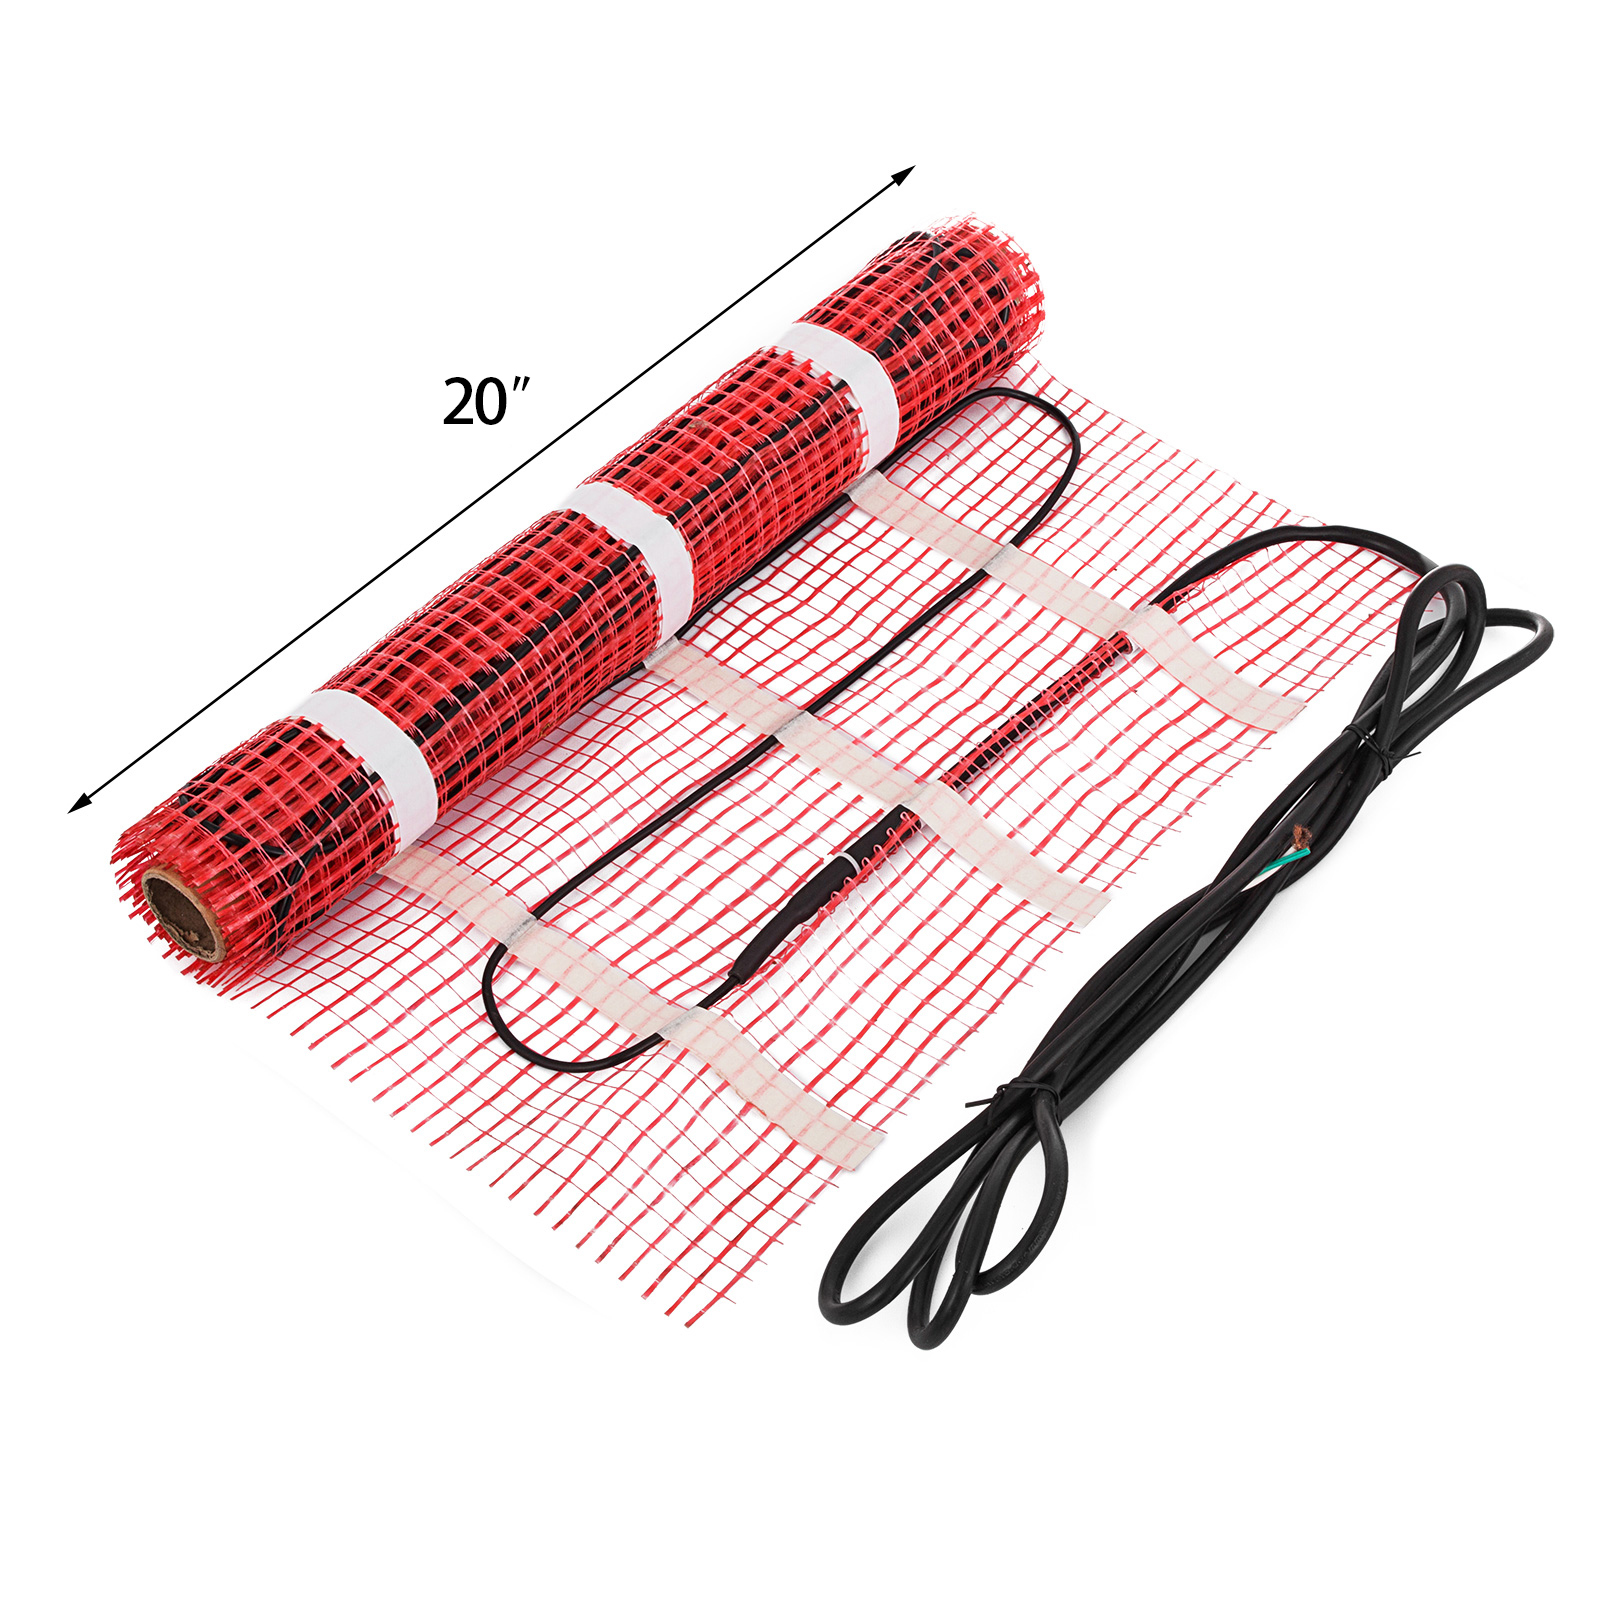 Electric Under Floor Heating mat Tile Radiant Warm System Self-Adhesive Mats